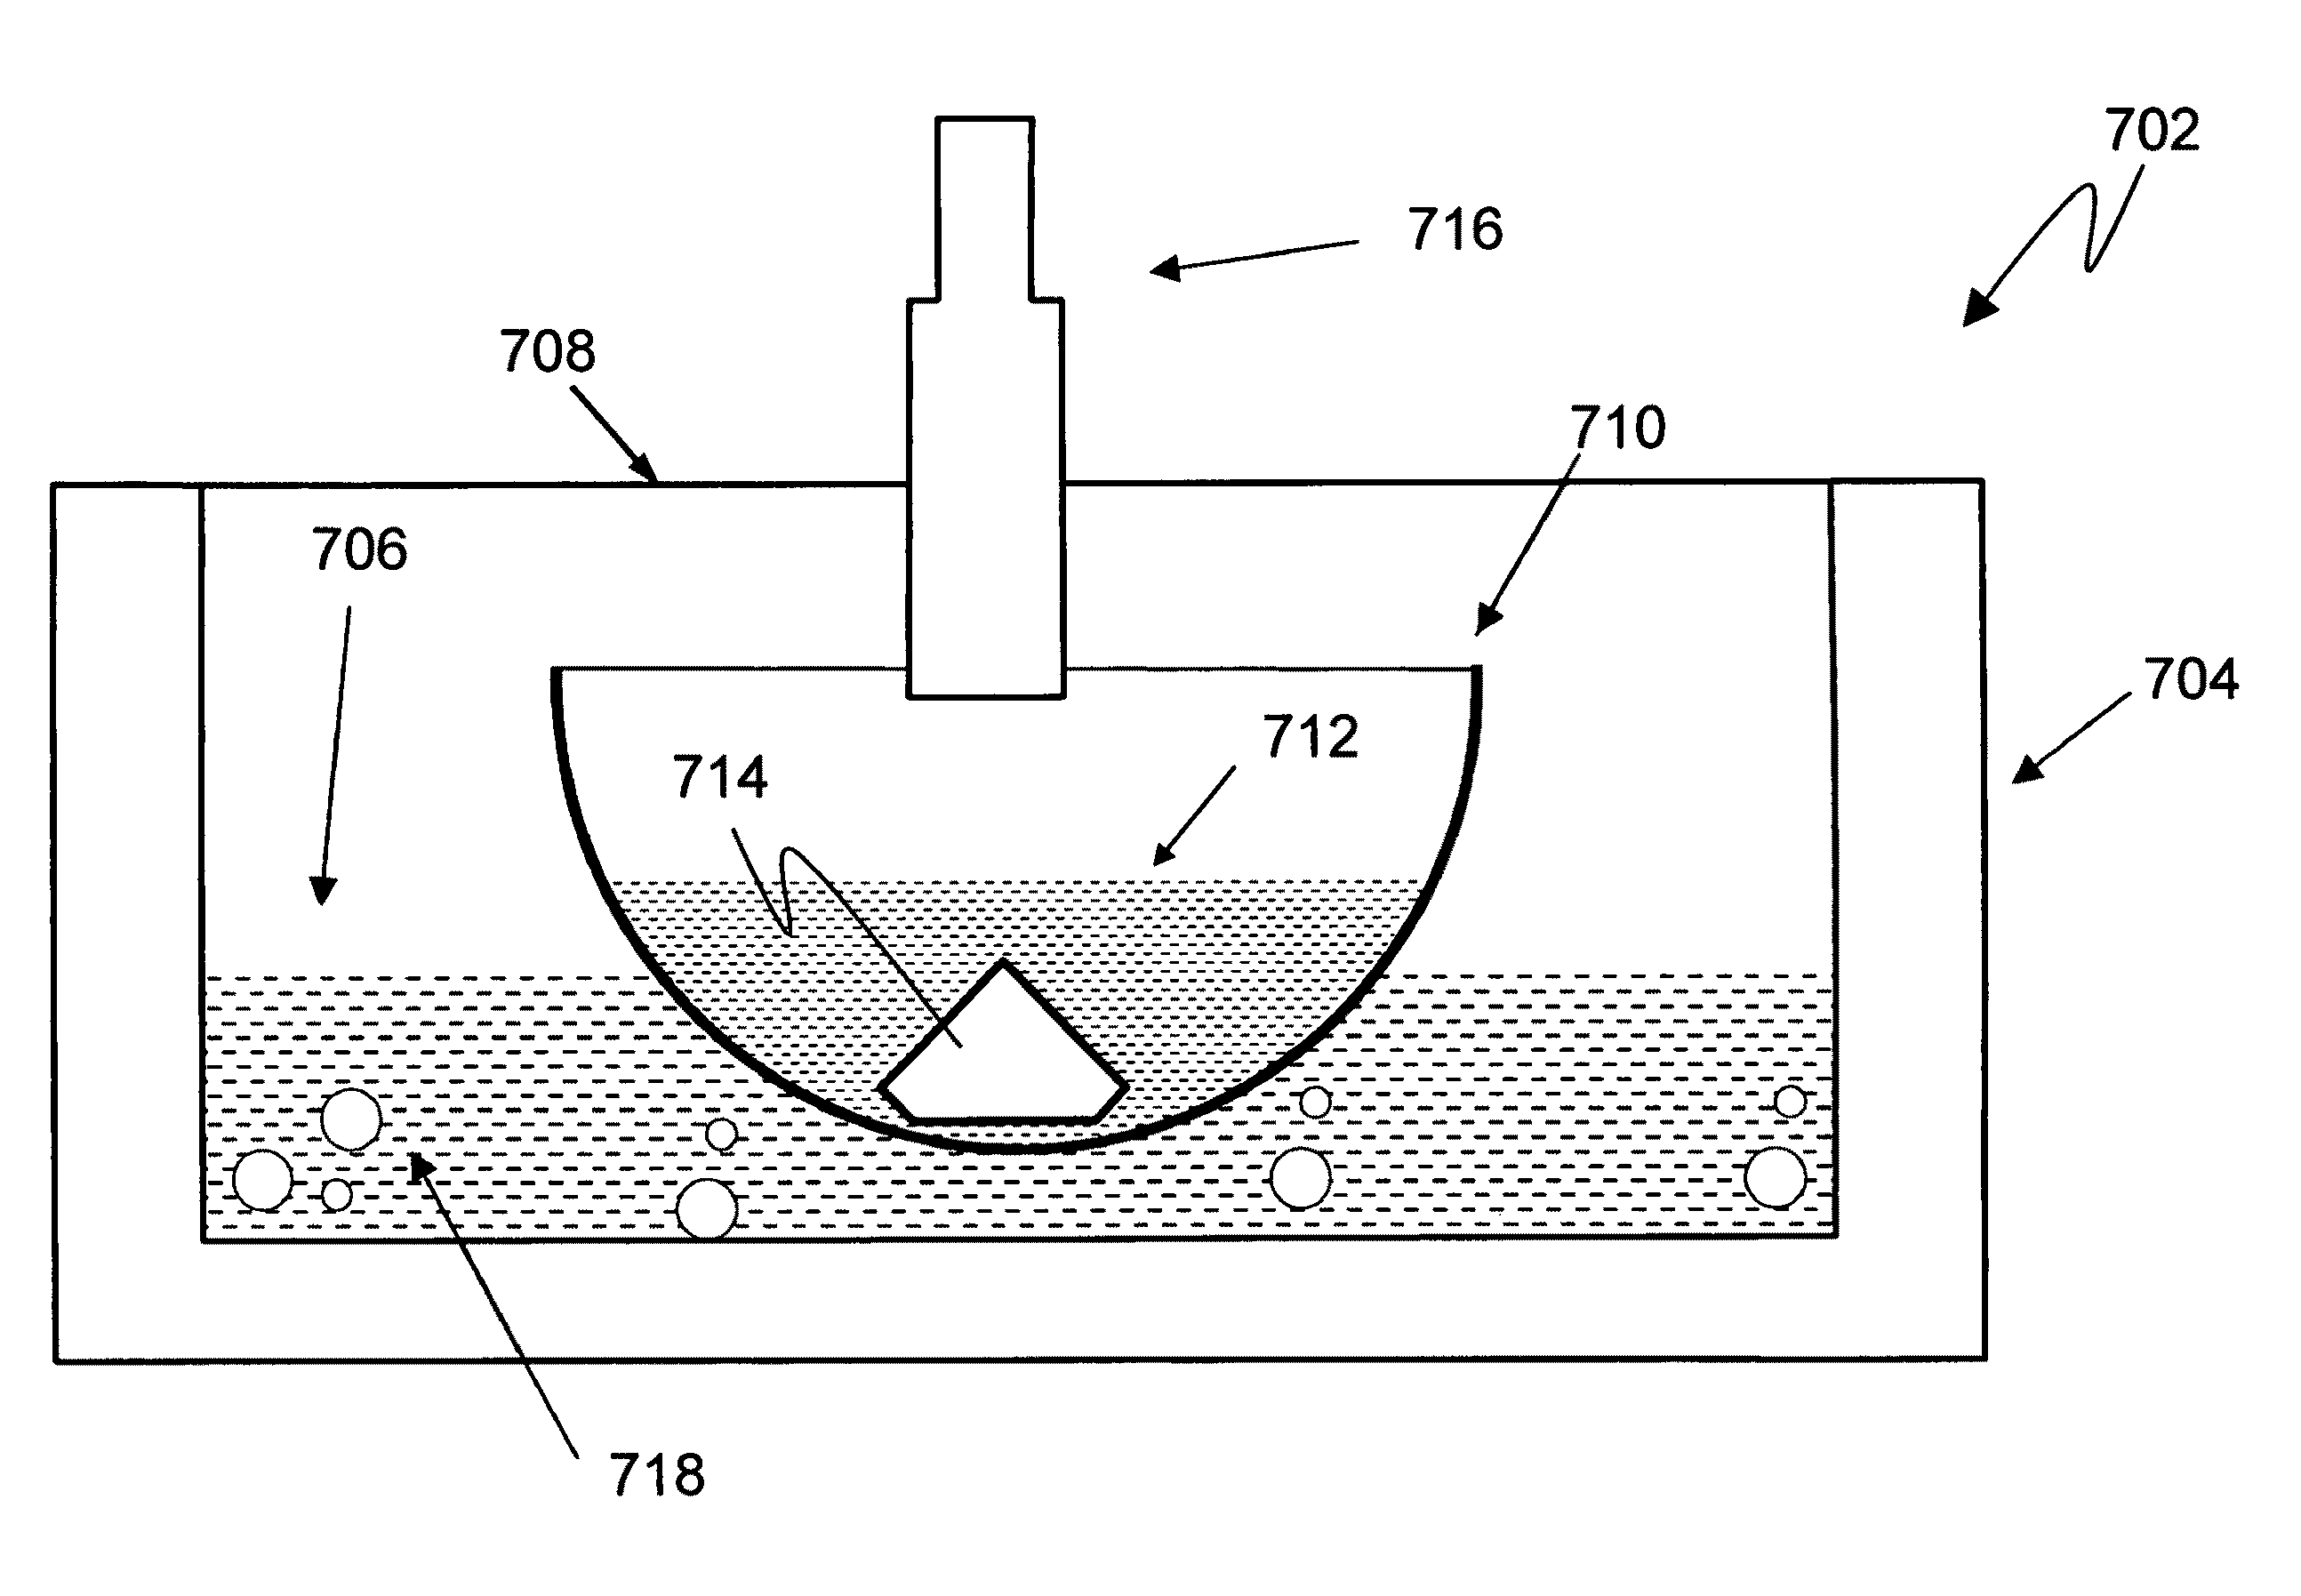 Method and apparatus for rapidly cooling a gem, including two stage cooling